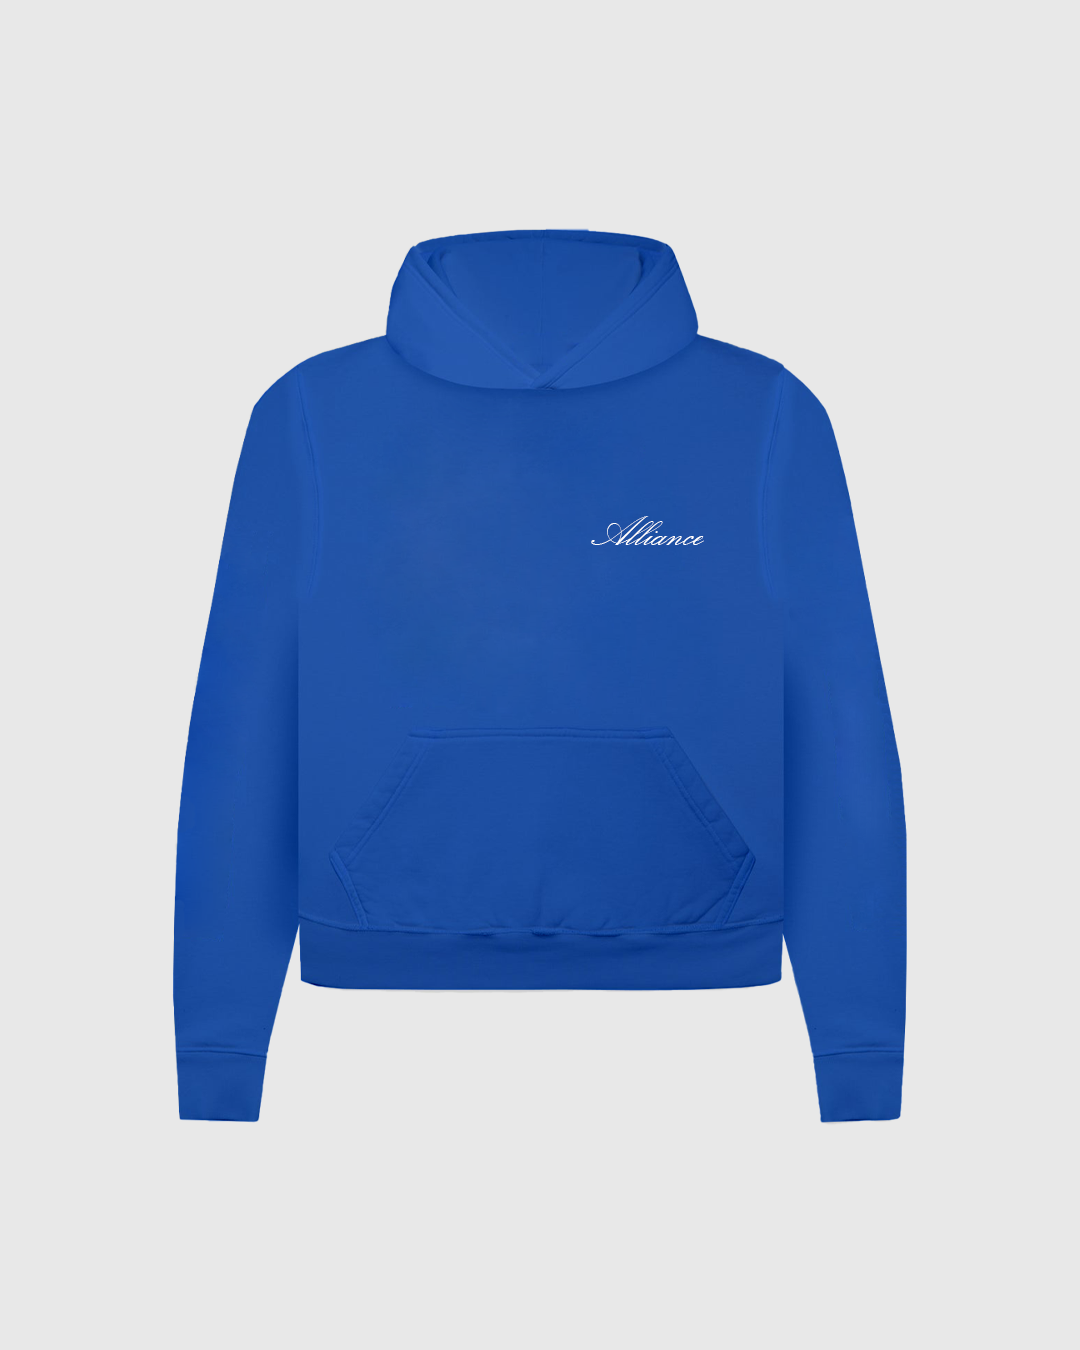 ALL ACCESS HOODIE